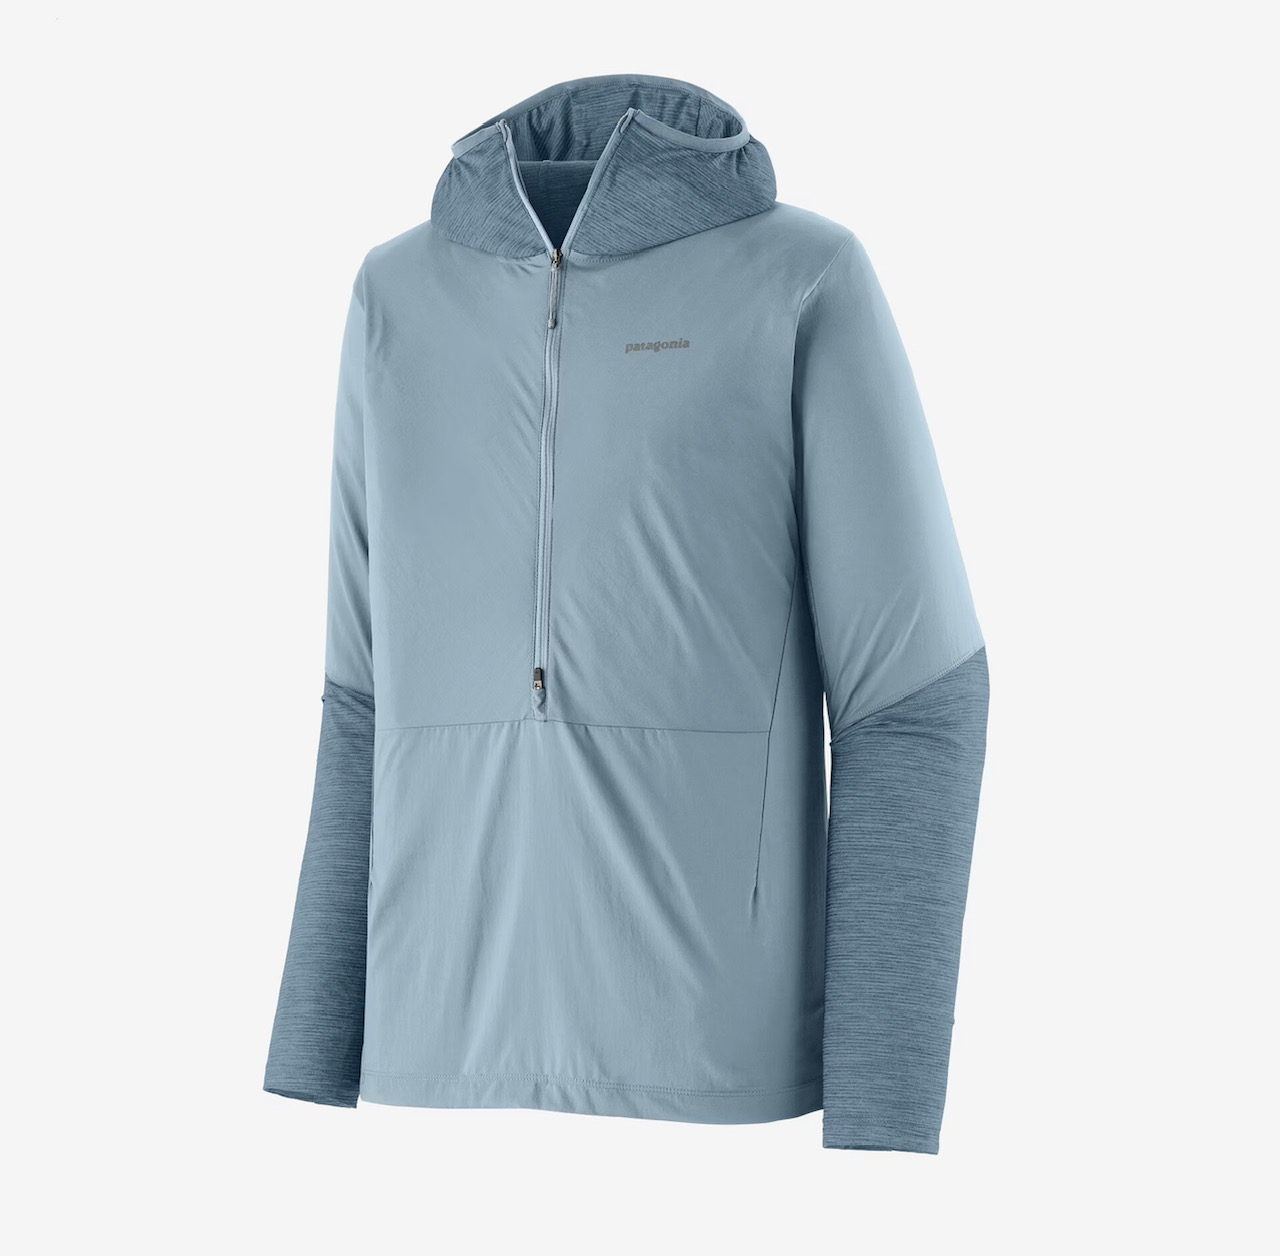 Patagonia M's Airshed Pro Pullover - Steam Blue - XL